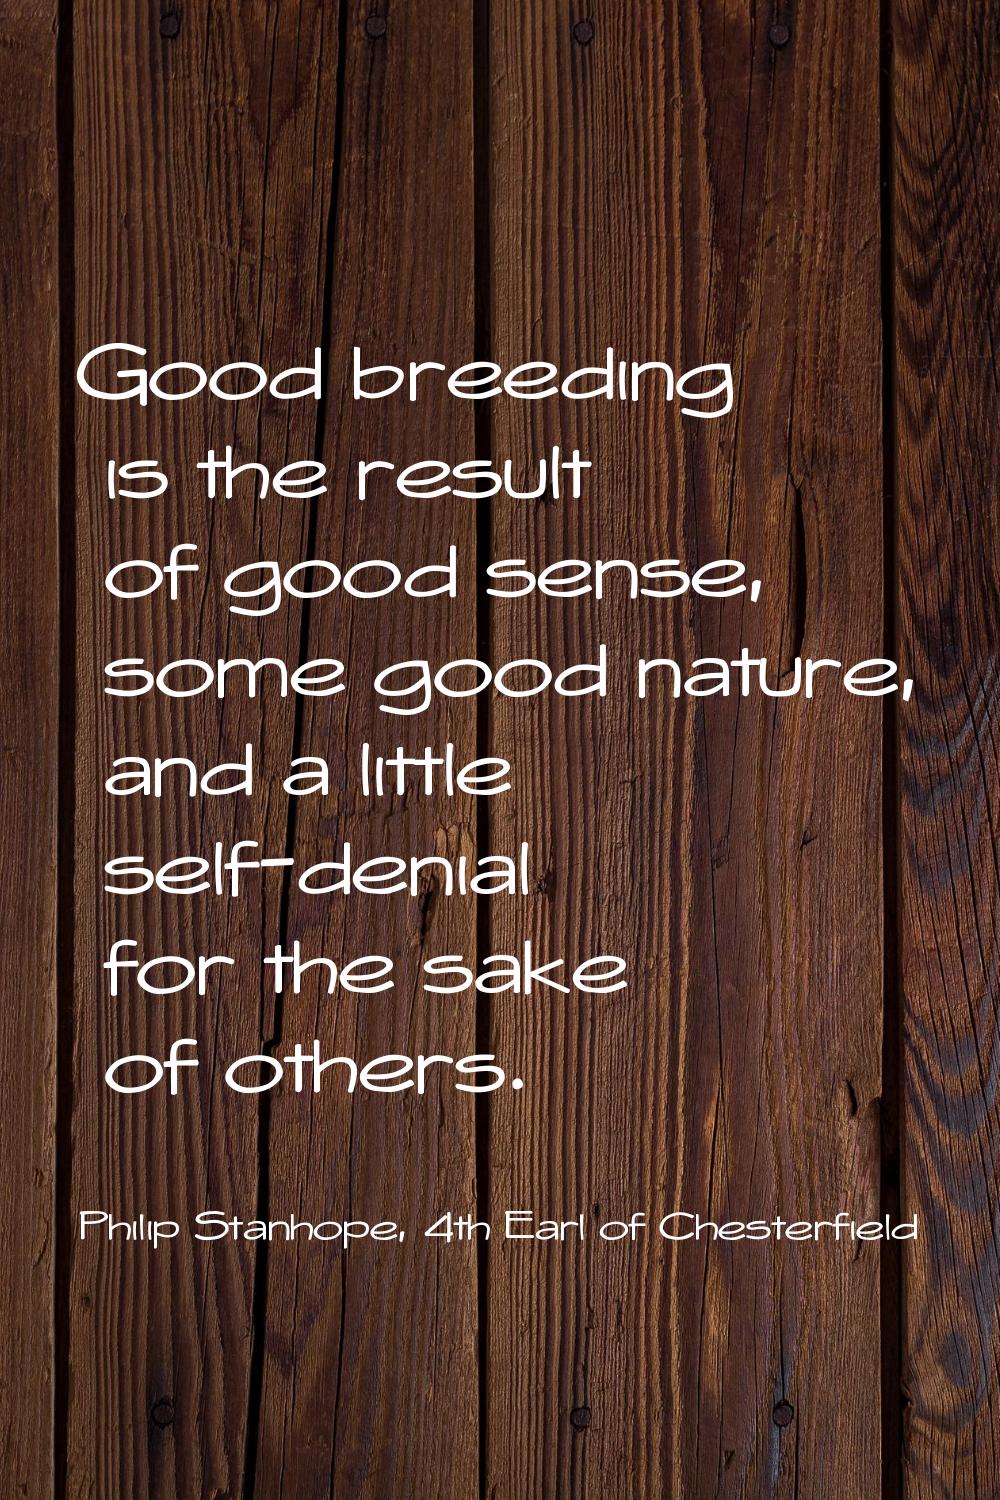 Good breeding is the result of good sense, some good nature, and a little self-denial for the sake 